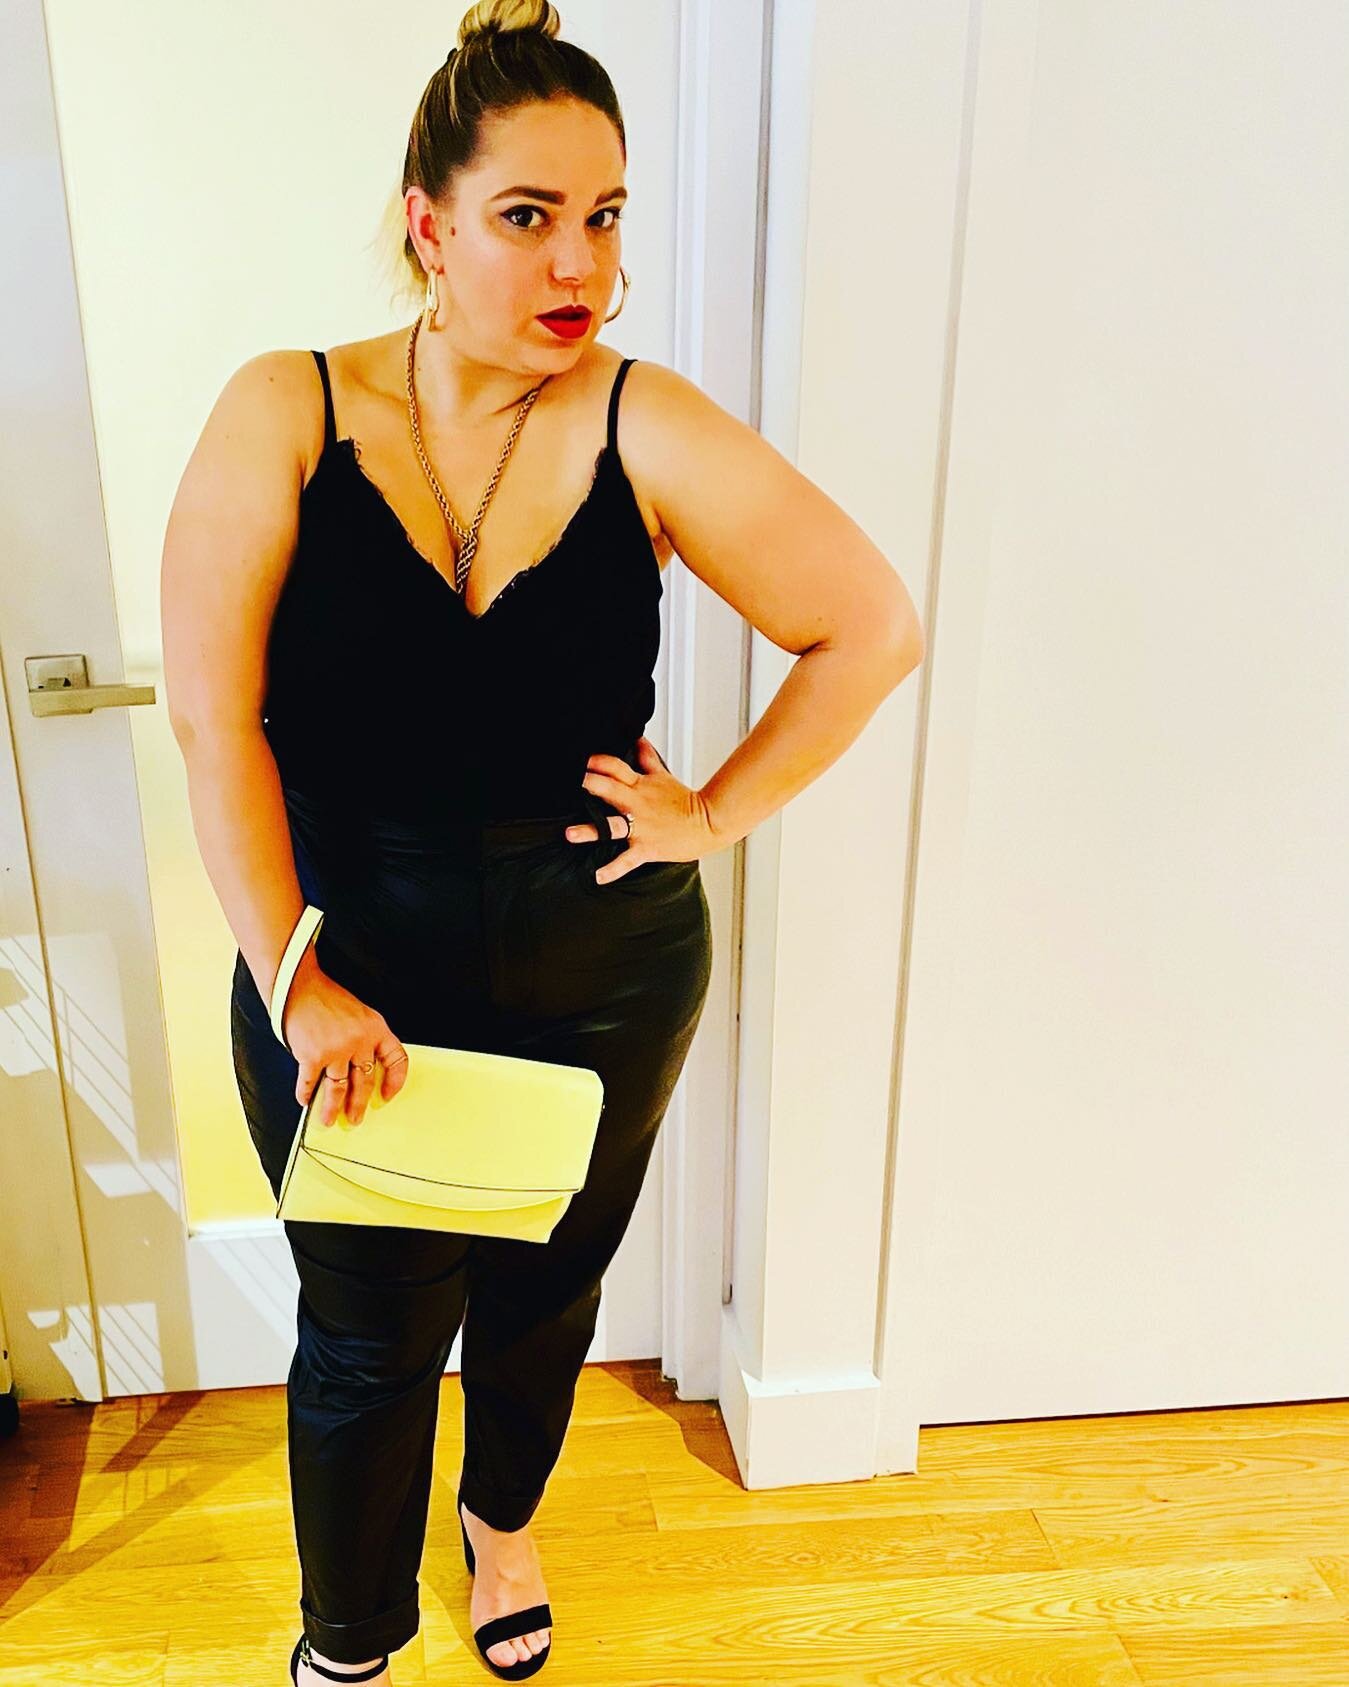 #OOTN Night Date Outfit - Simple and Chic in All Black with a Pop of Color with my #clutch - I am loving this neon yellow for Spring &amp; Summer - Vintage necklace with diamond and gold snake hoops - And Lets Never Forget the Signature #RedLip 
.
.
